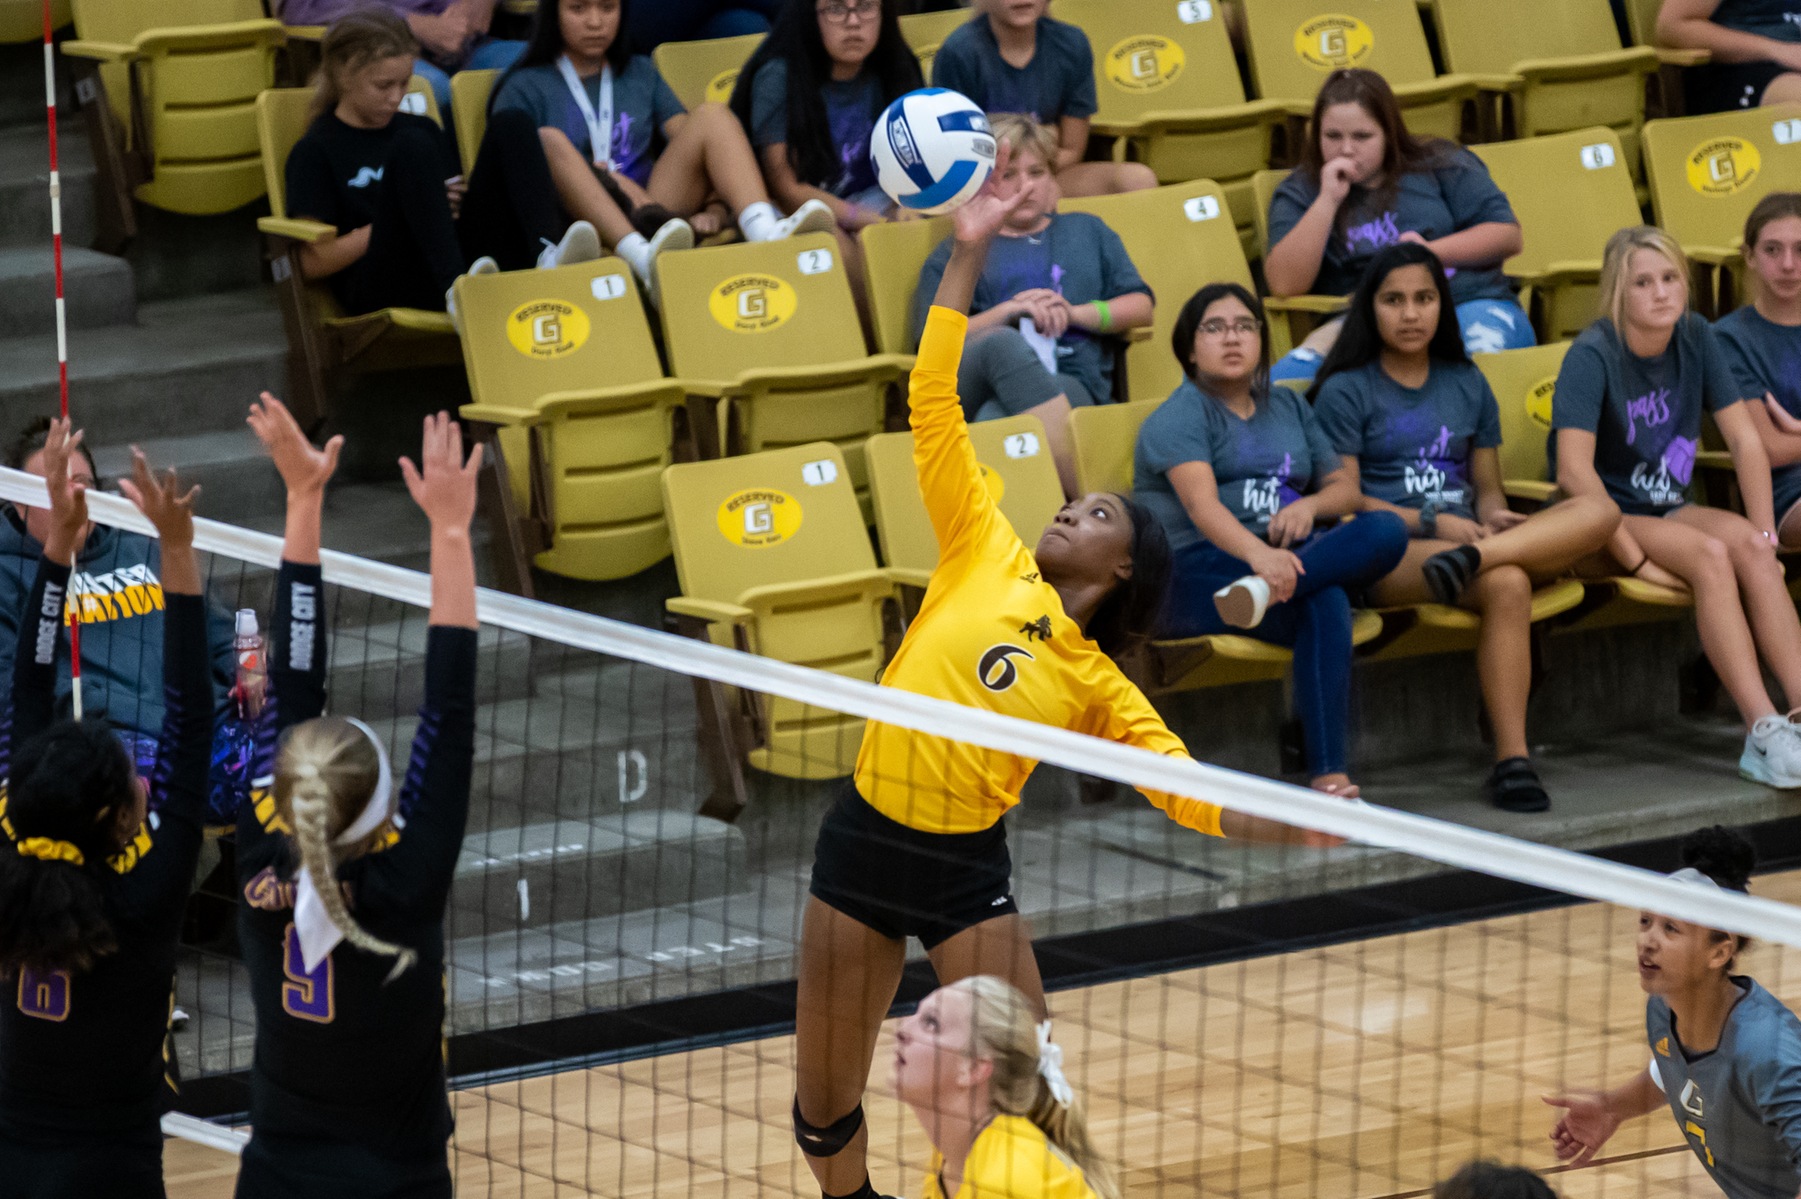 Take that! Broncbusters sweep Dodge City